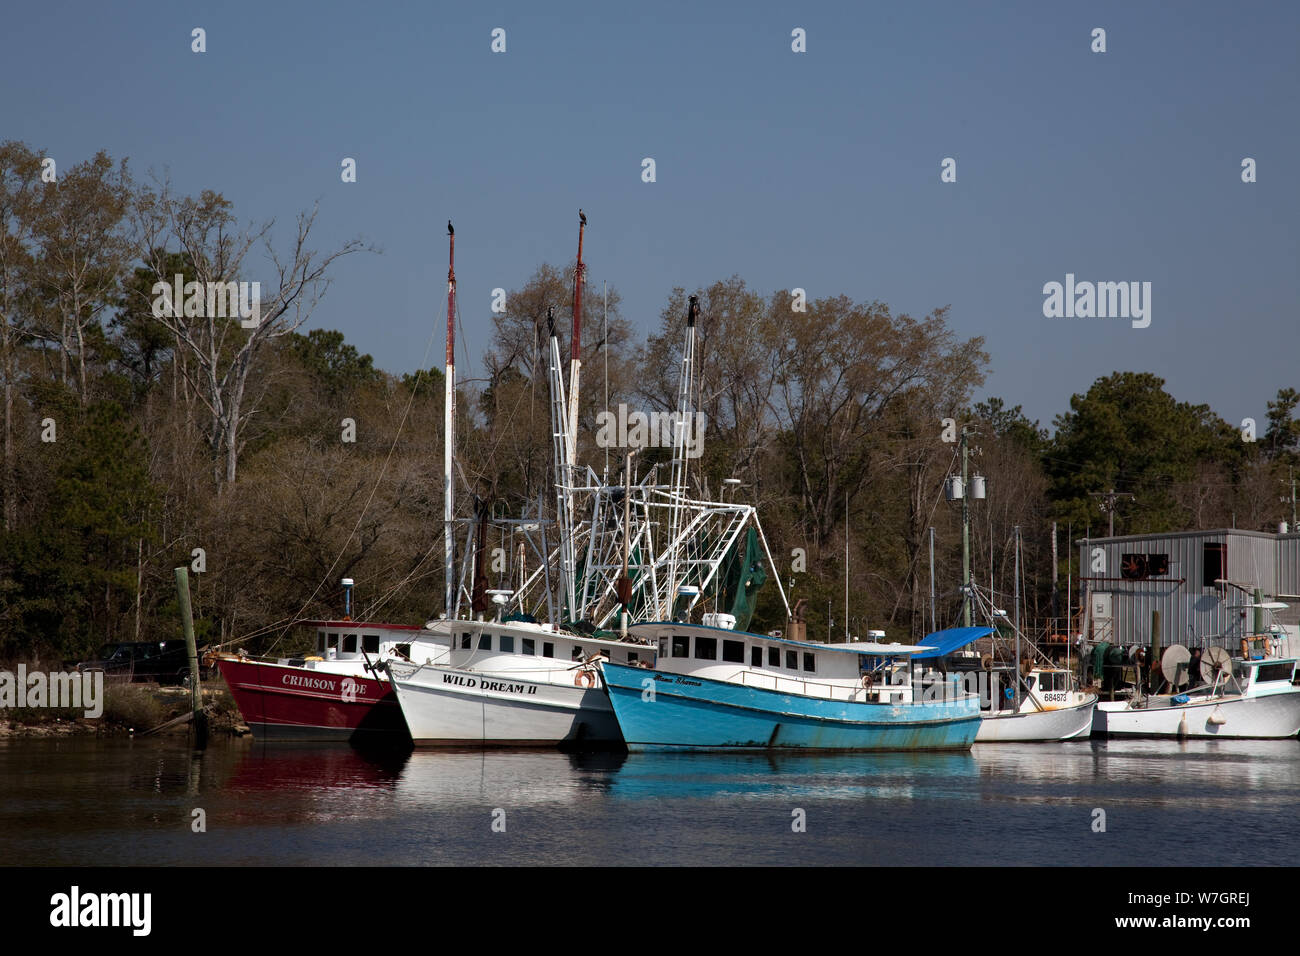 Bayou La Batre, Alabama, is a fishing village with a seafood-processing harbor for fishing boats and shrimp boats Stock Photo